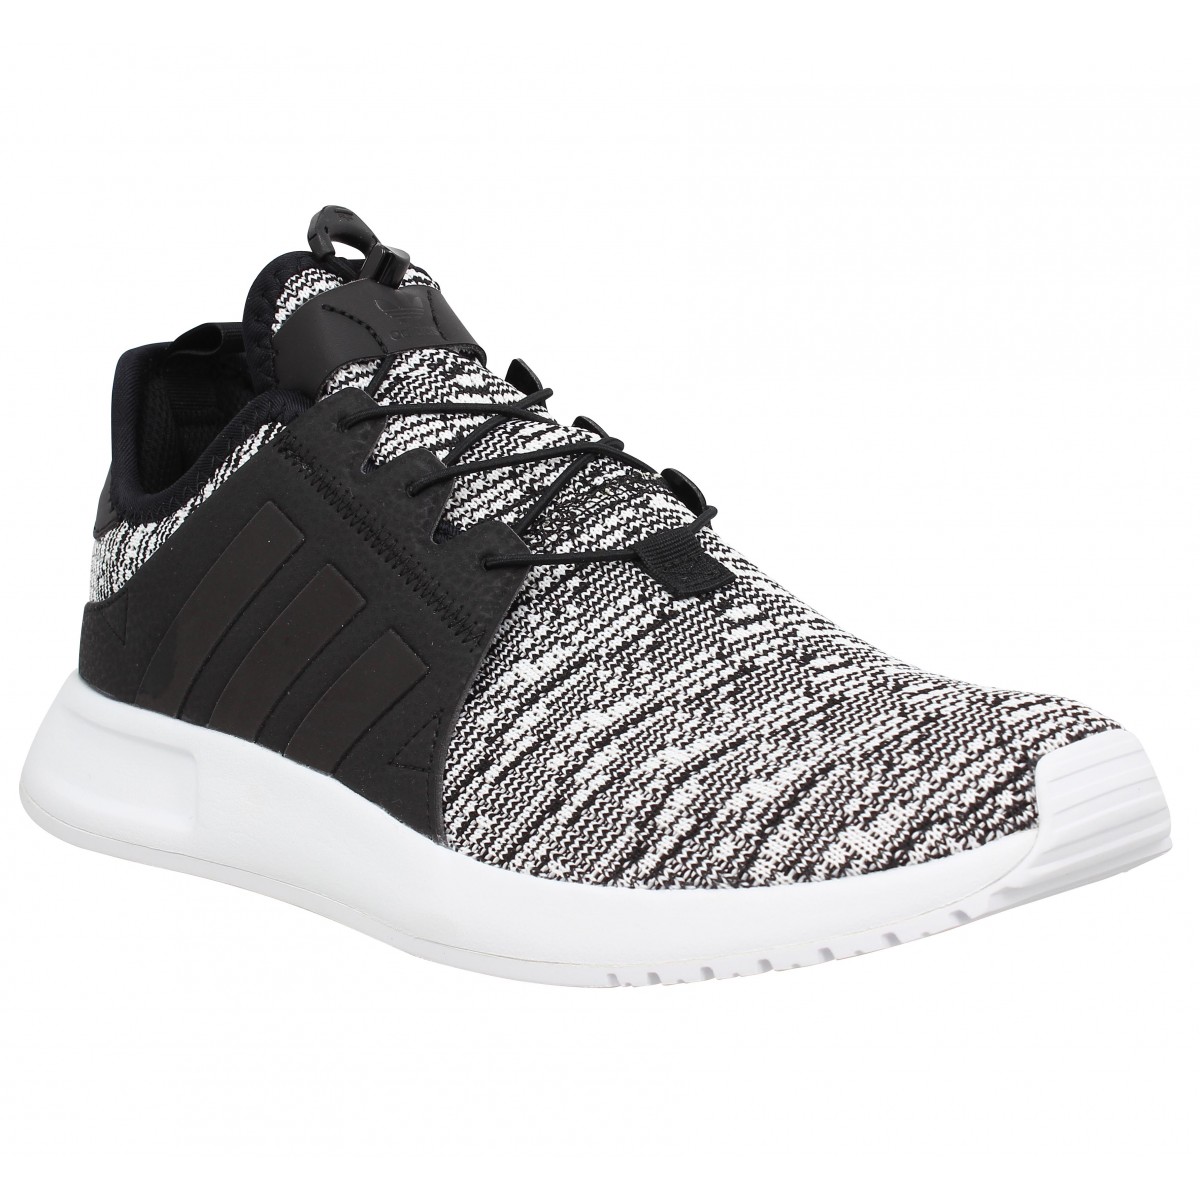 tempo huiswerk neef Adidas x plr toile homme noir blanc homme | Fanny chaussures